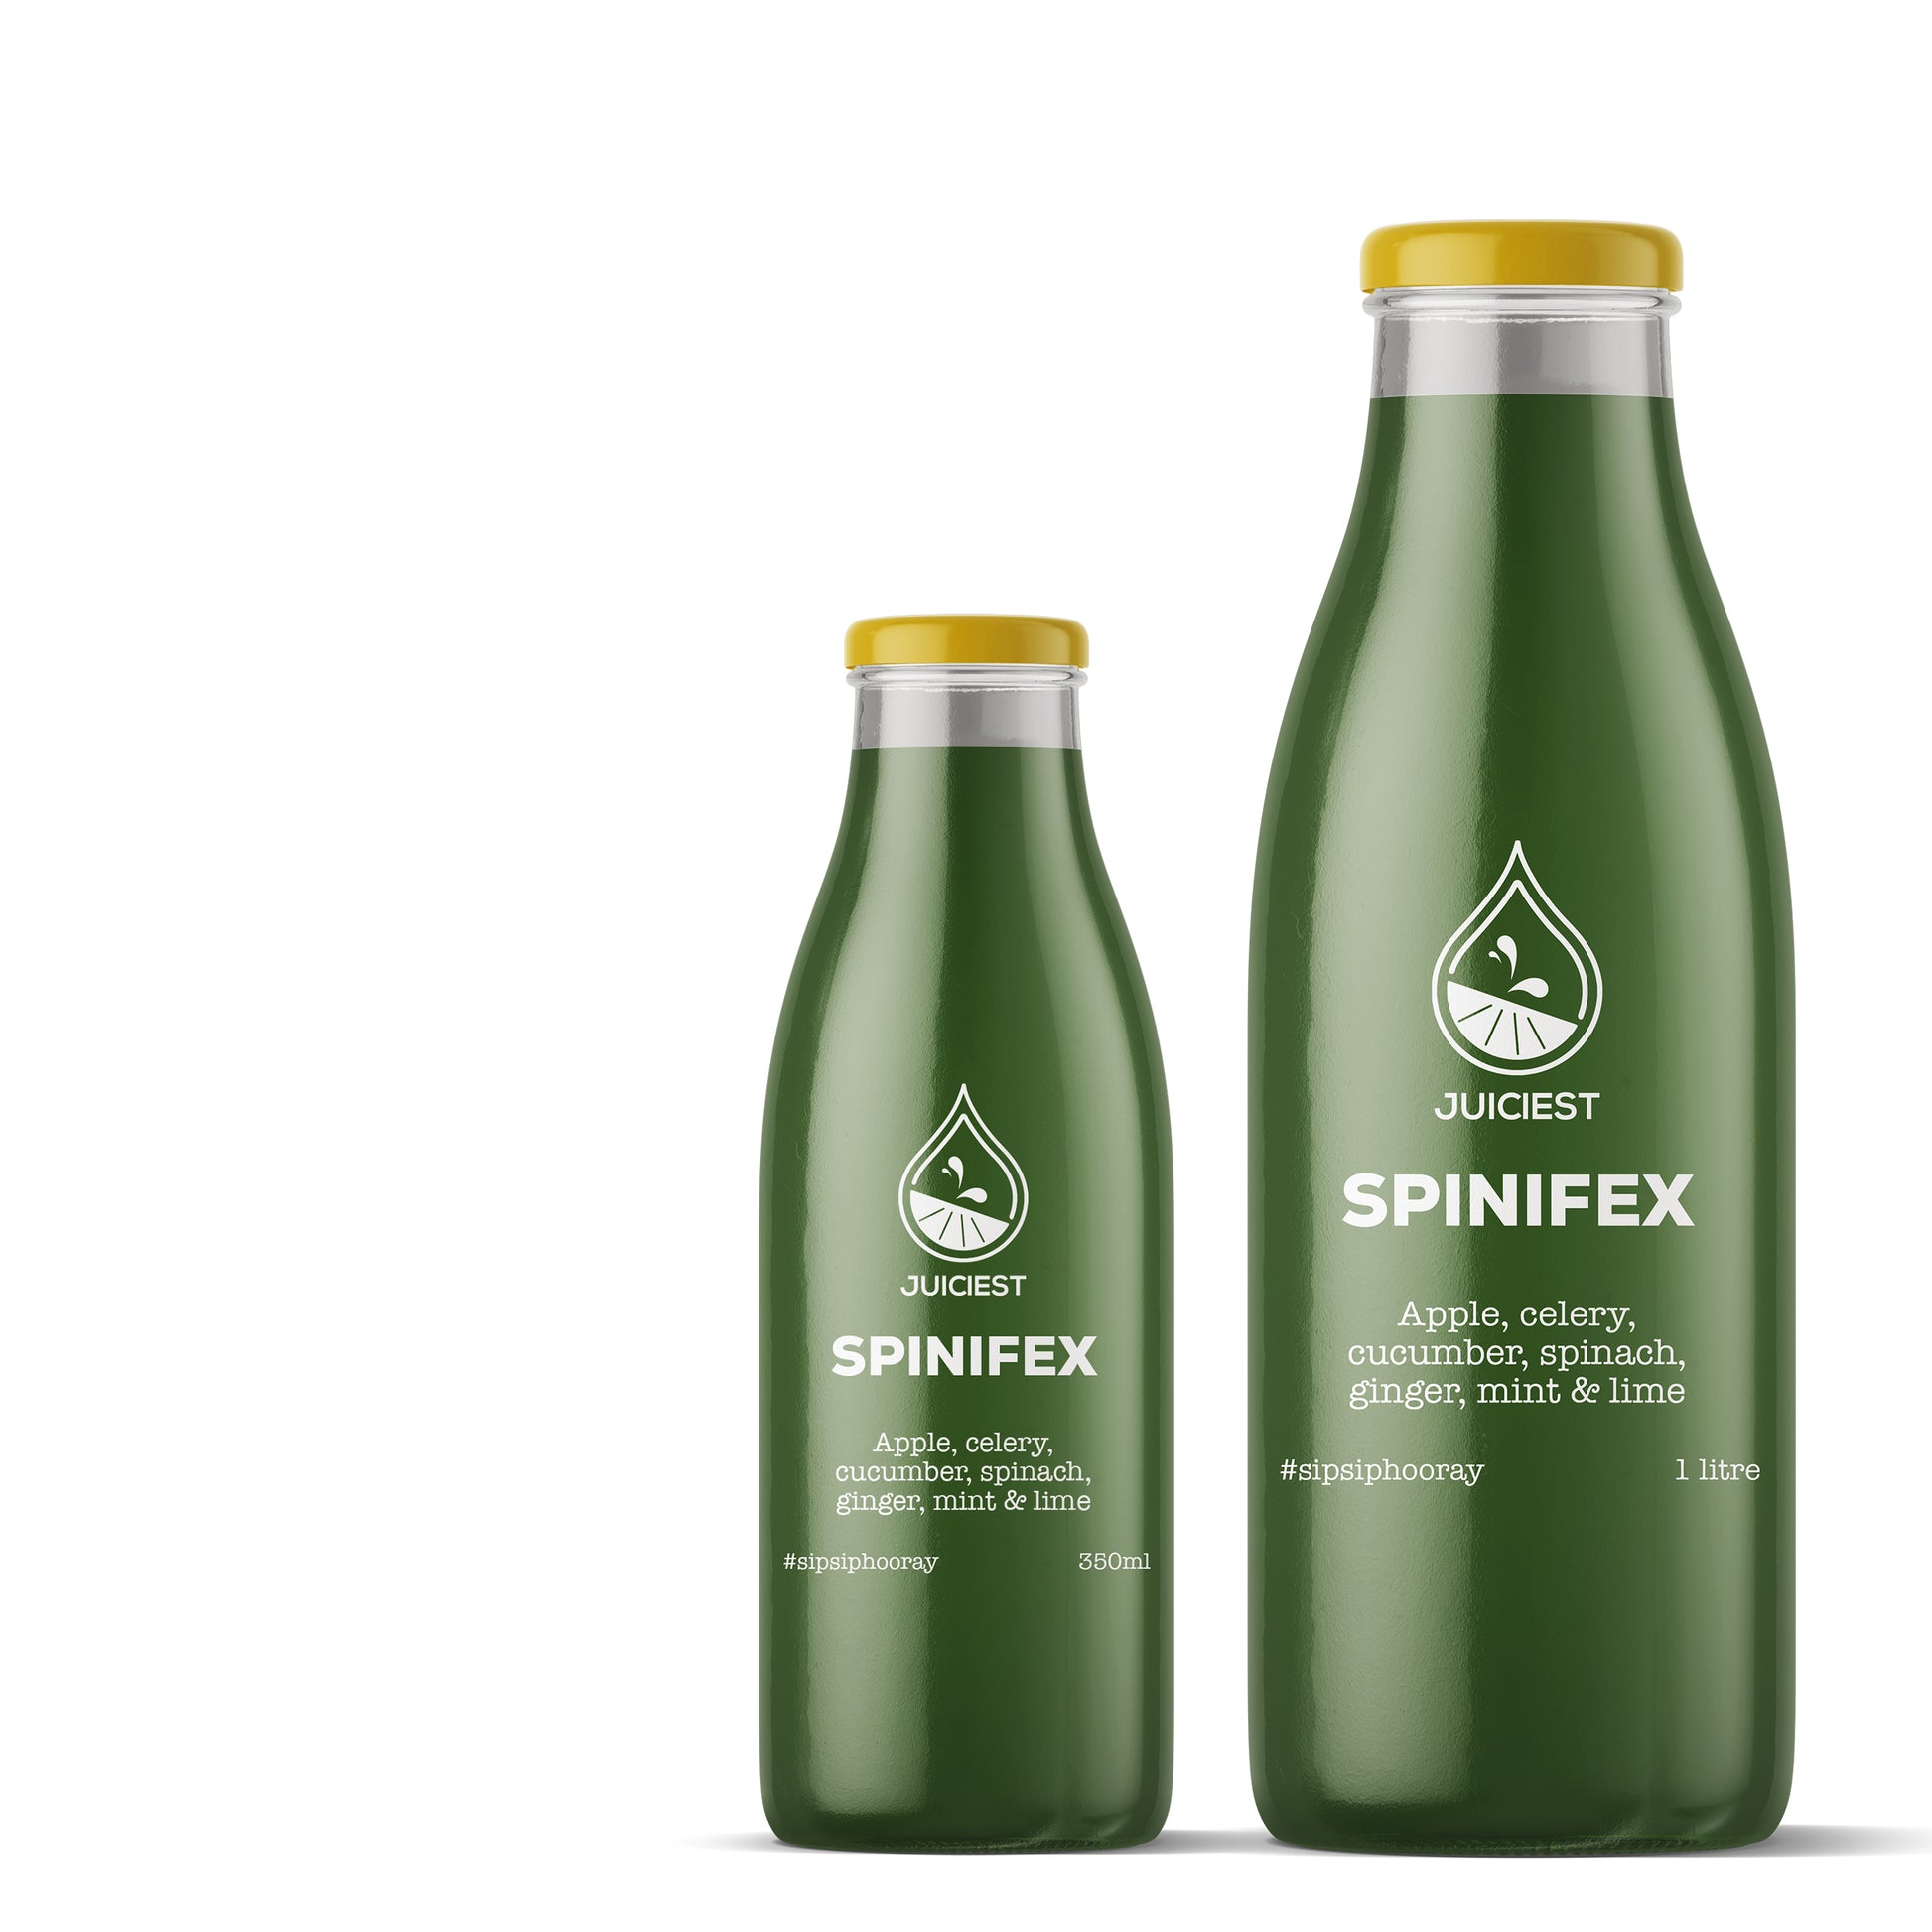 Juiciest Spinifex 350ml and 1L bottles